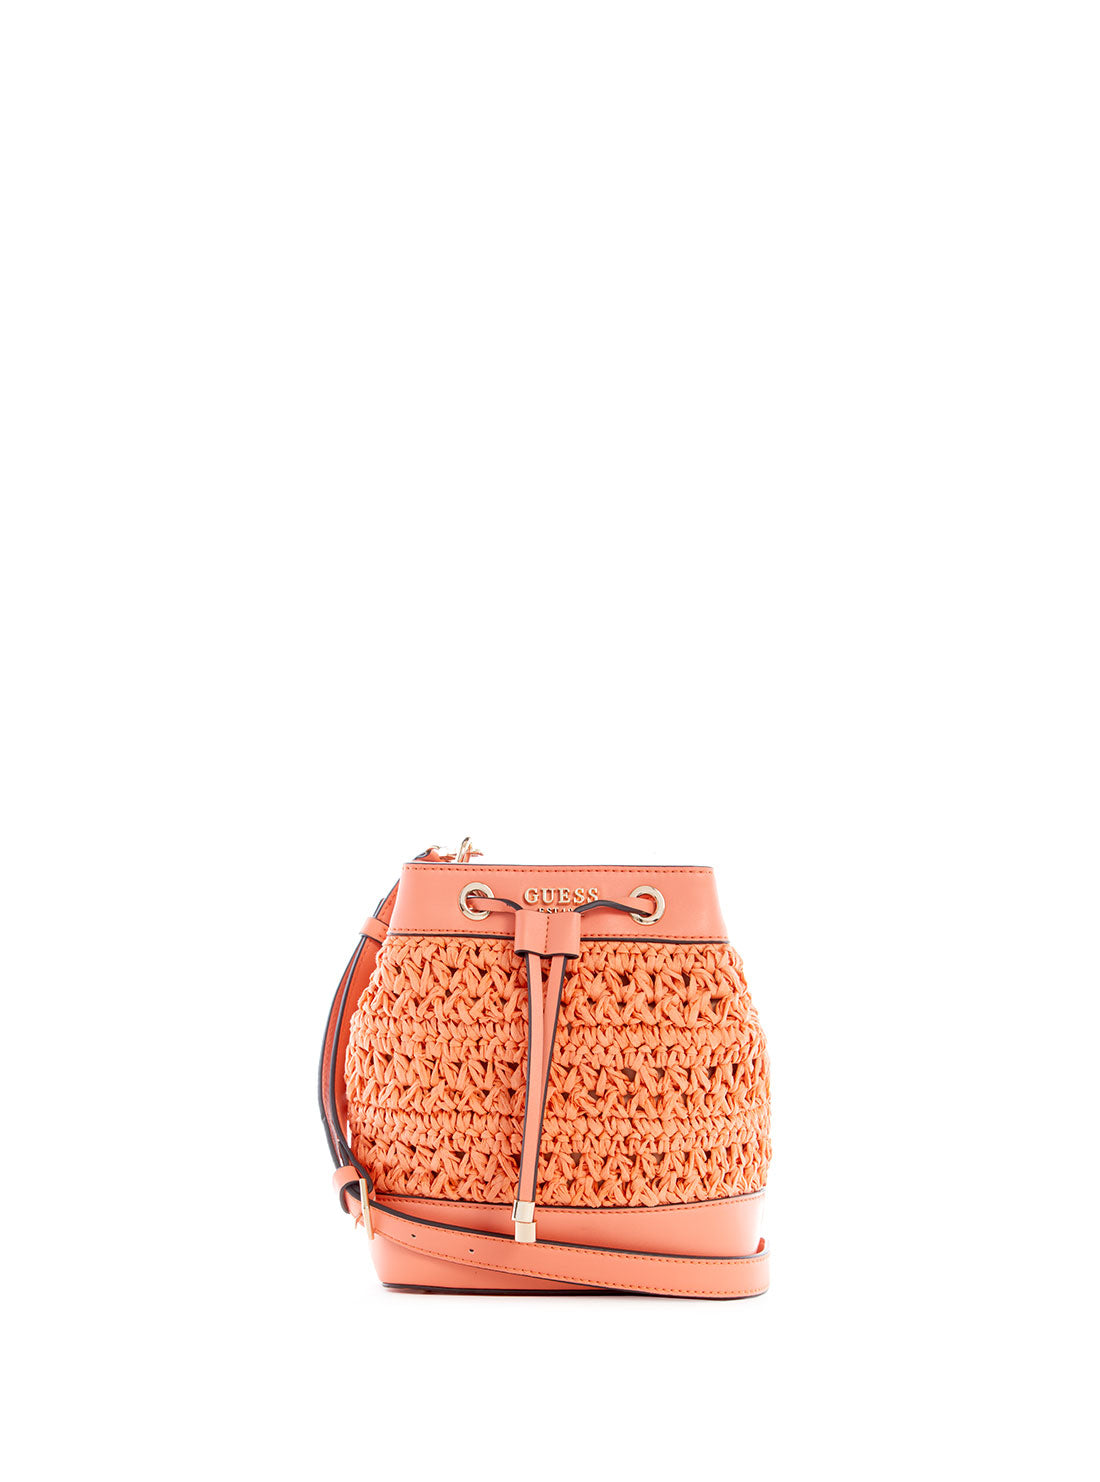 GUESS Women's Coral Liguria Bucket Bag WG869604 Front View